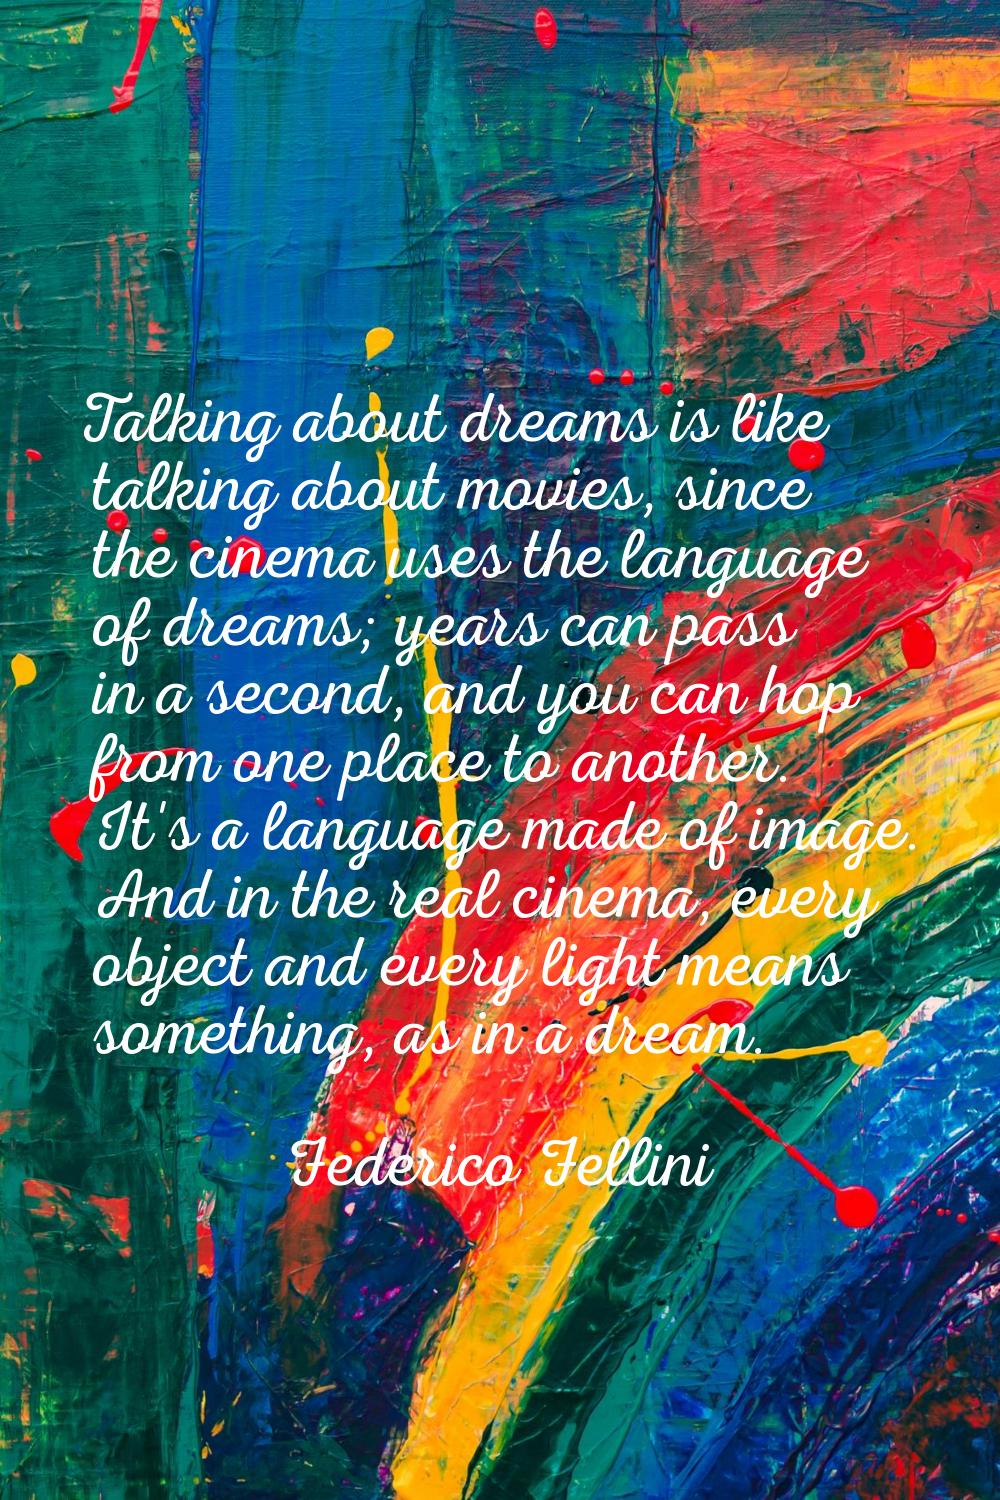 Talking about dreams is like talking about movies, since the cinema uses the language of dreams; ye